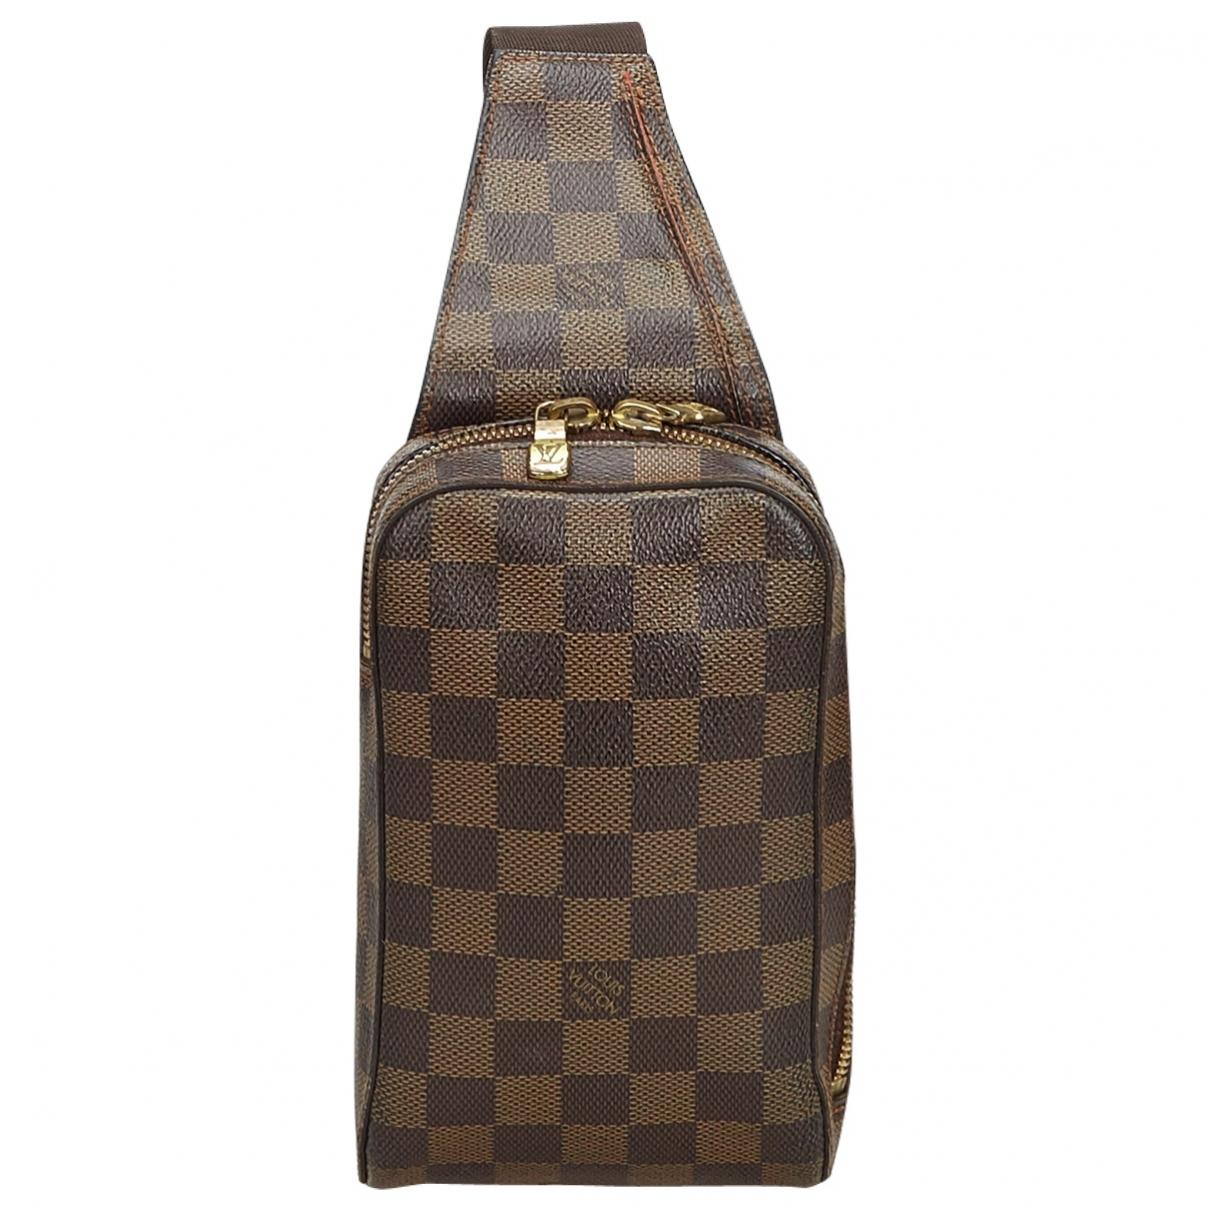 Lyst - Louis Vuitton Geronimo Brown Cloth Bag in Brown for Men